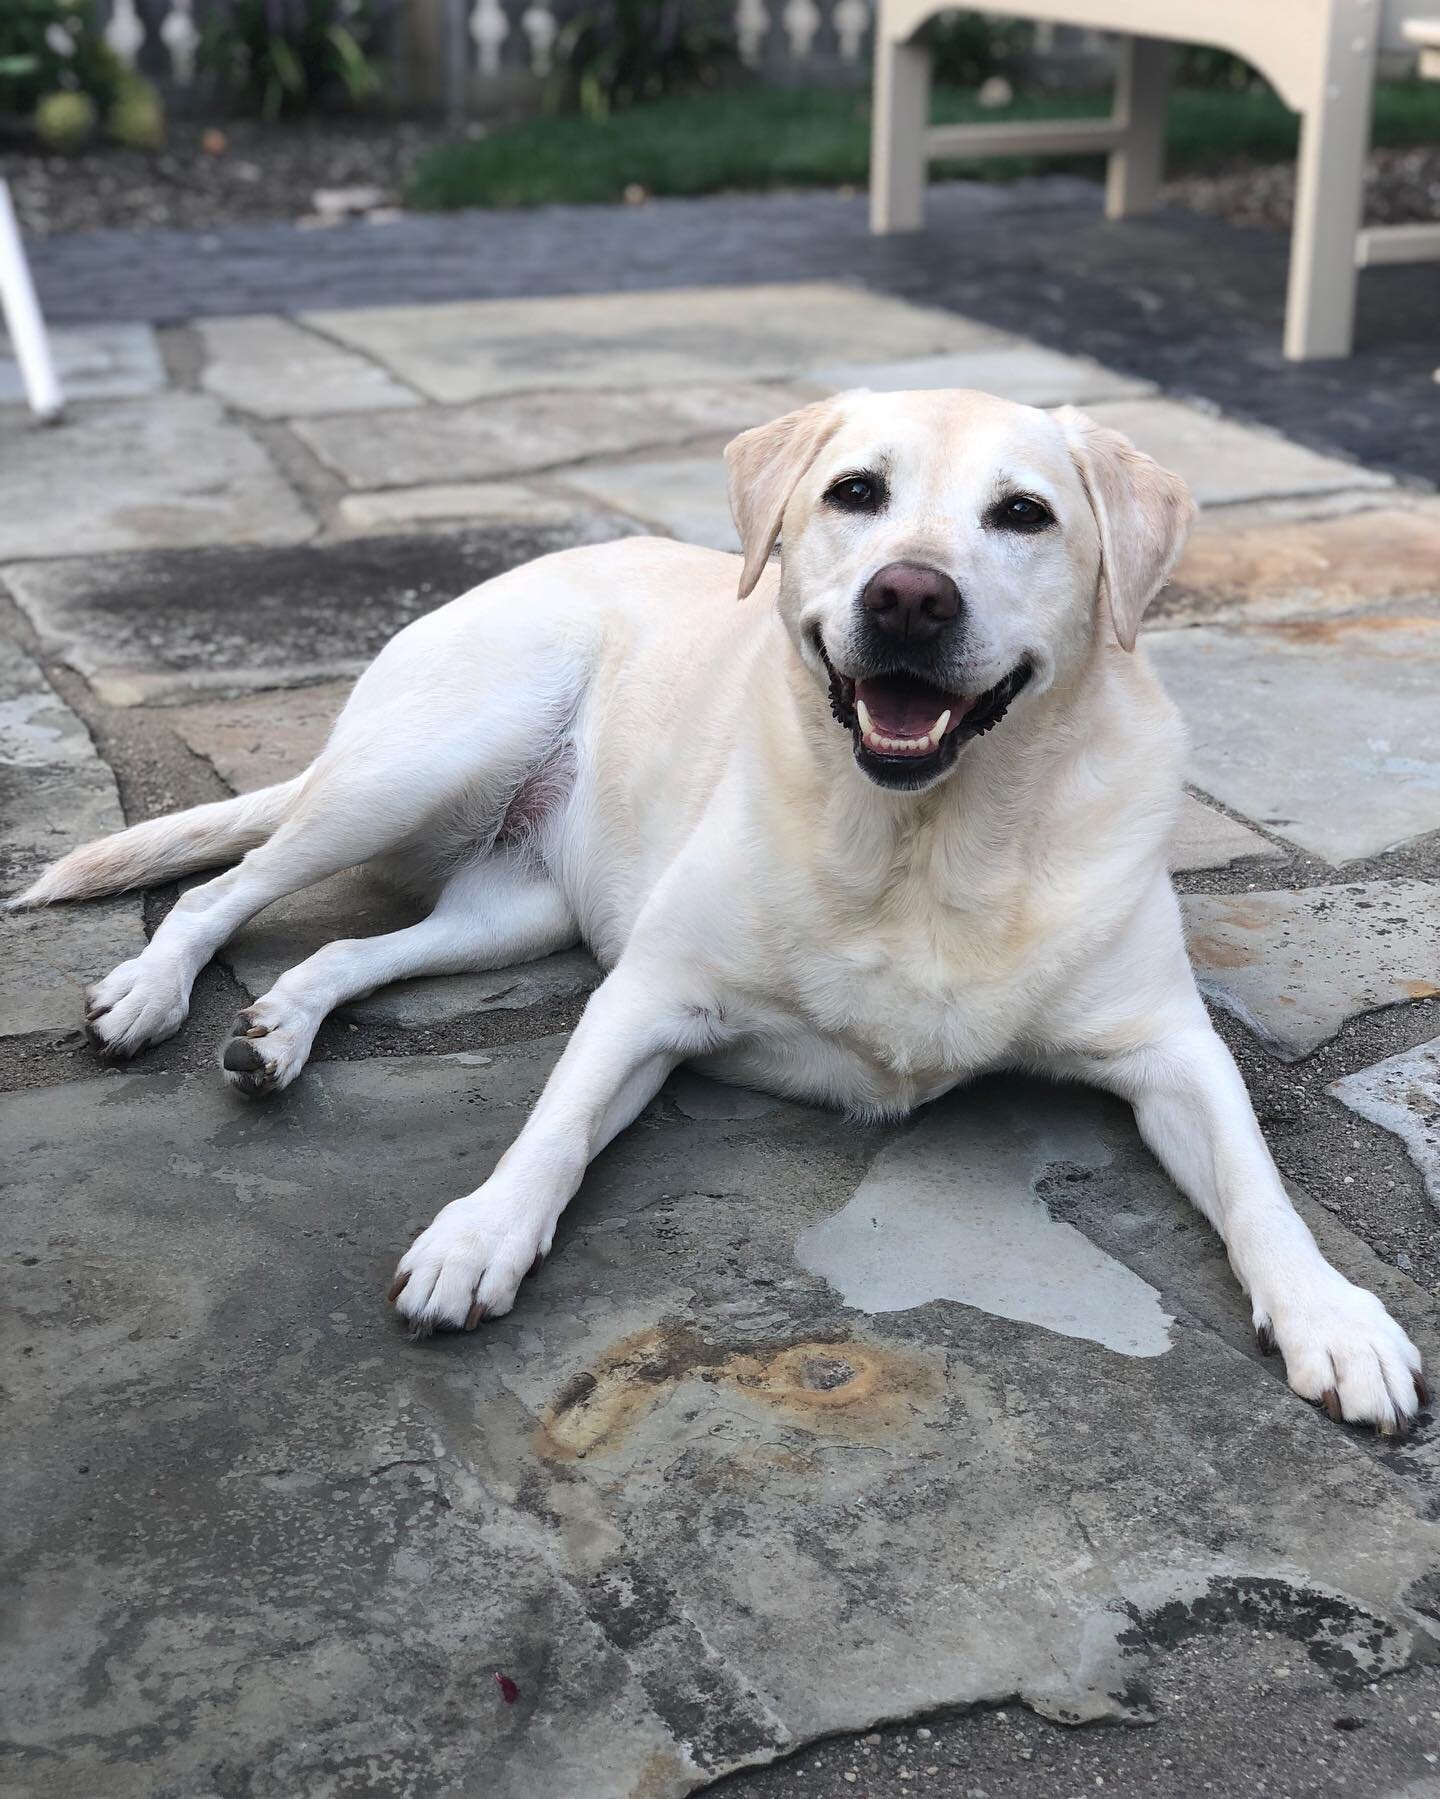 We said goodbye to April this past Monday, May 8th. 

She passed peacefully in her favorite shady spot in our backyard, with the assistance of our trusted veterinarian, and surrounded by us, Heidi, and August. We spent a beautiful sunny day outside t